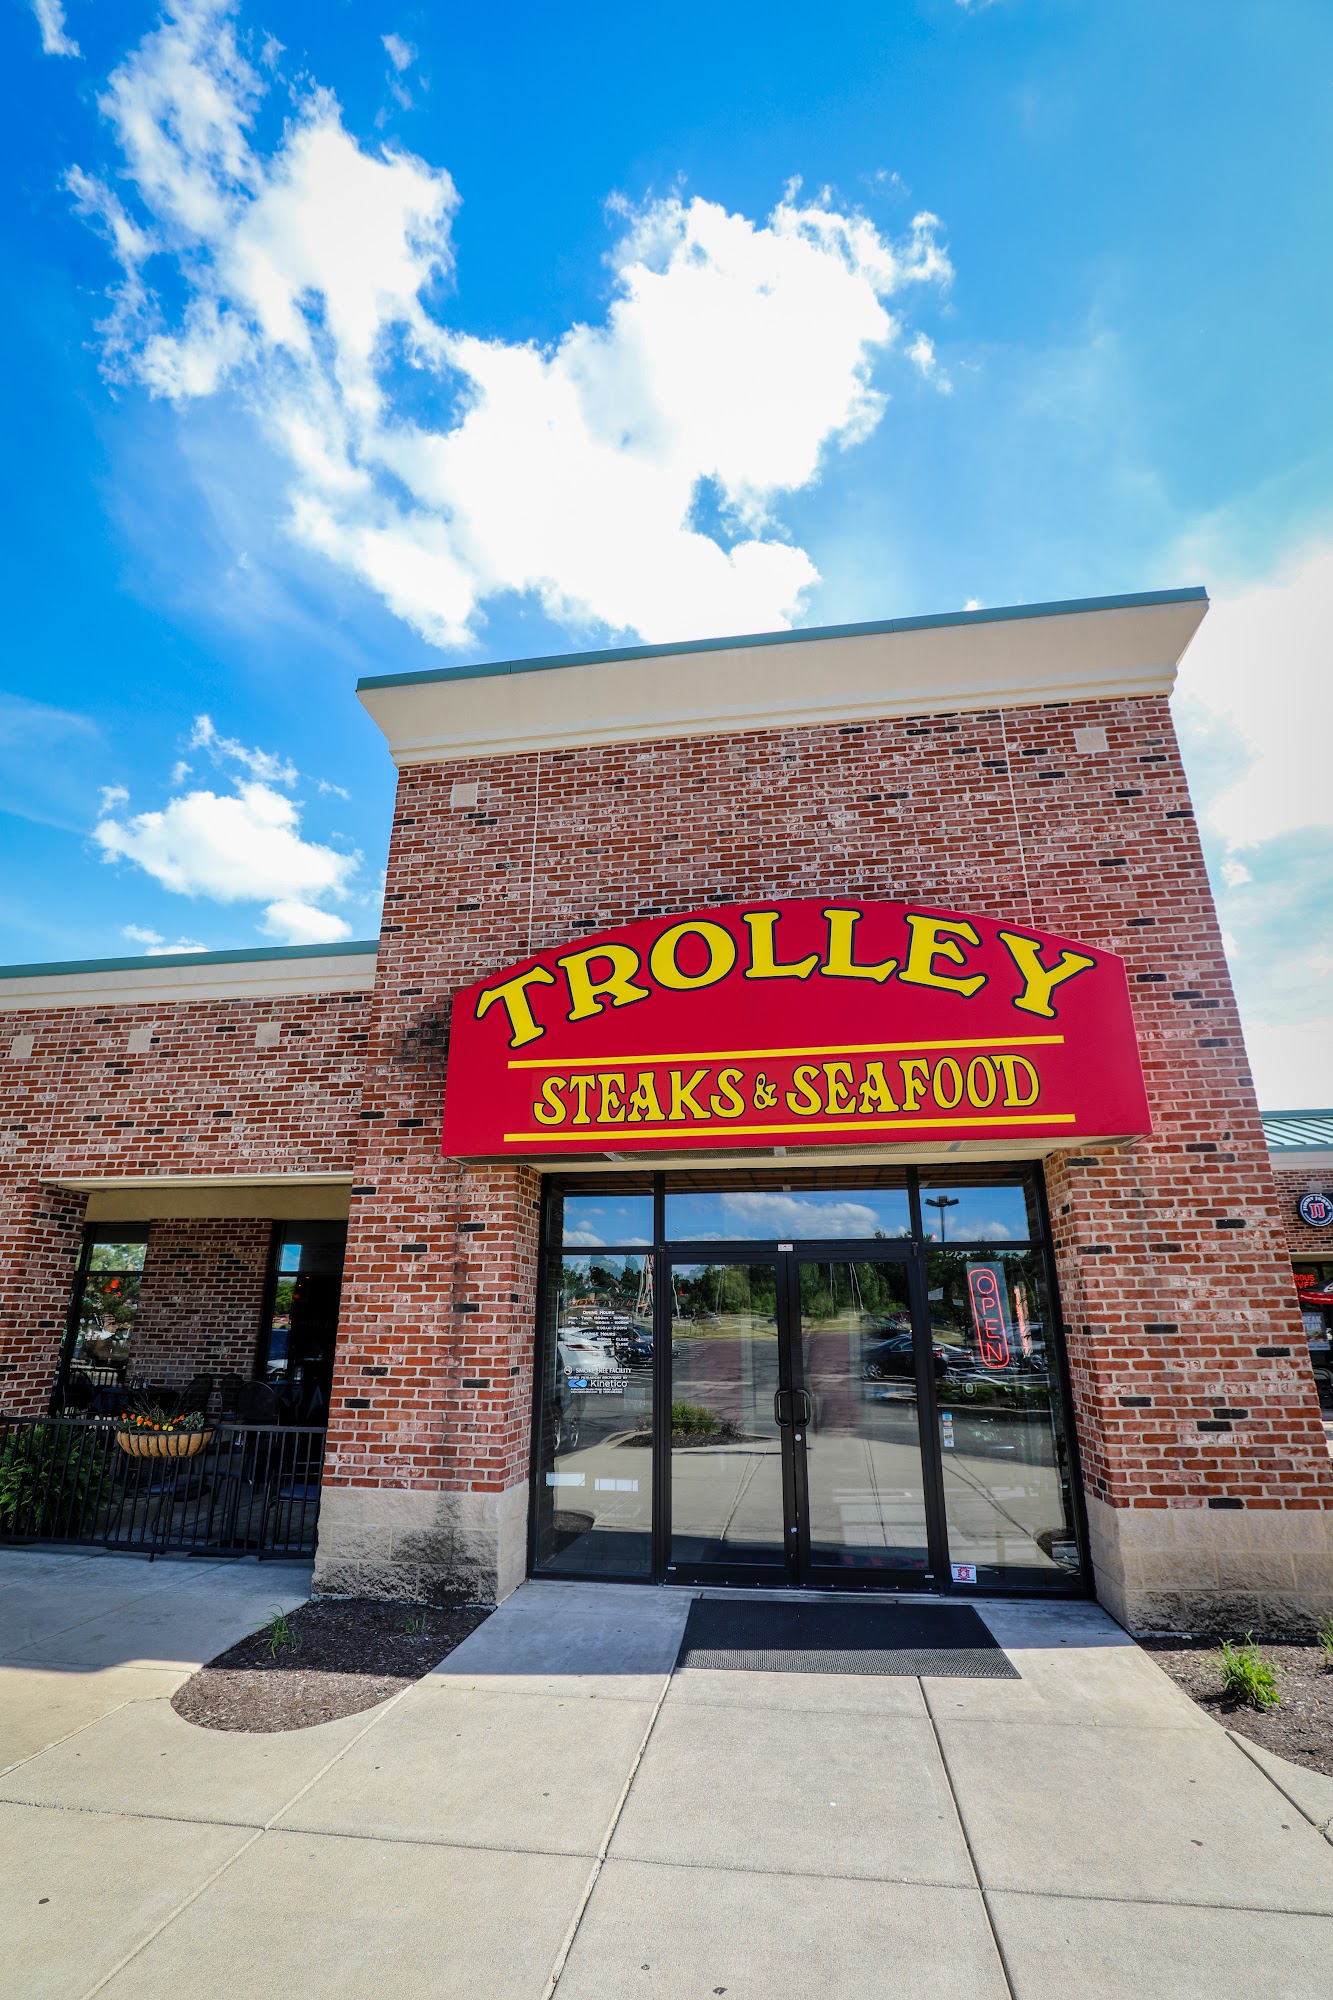 Trolley Steaks and Seafood